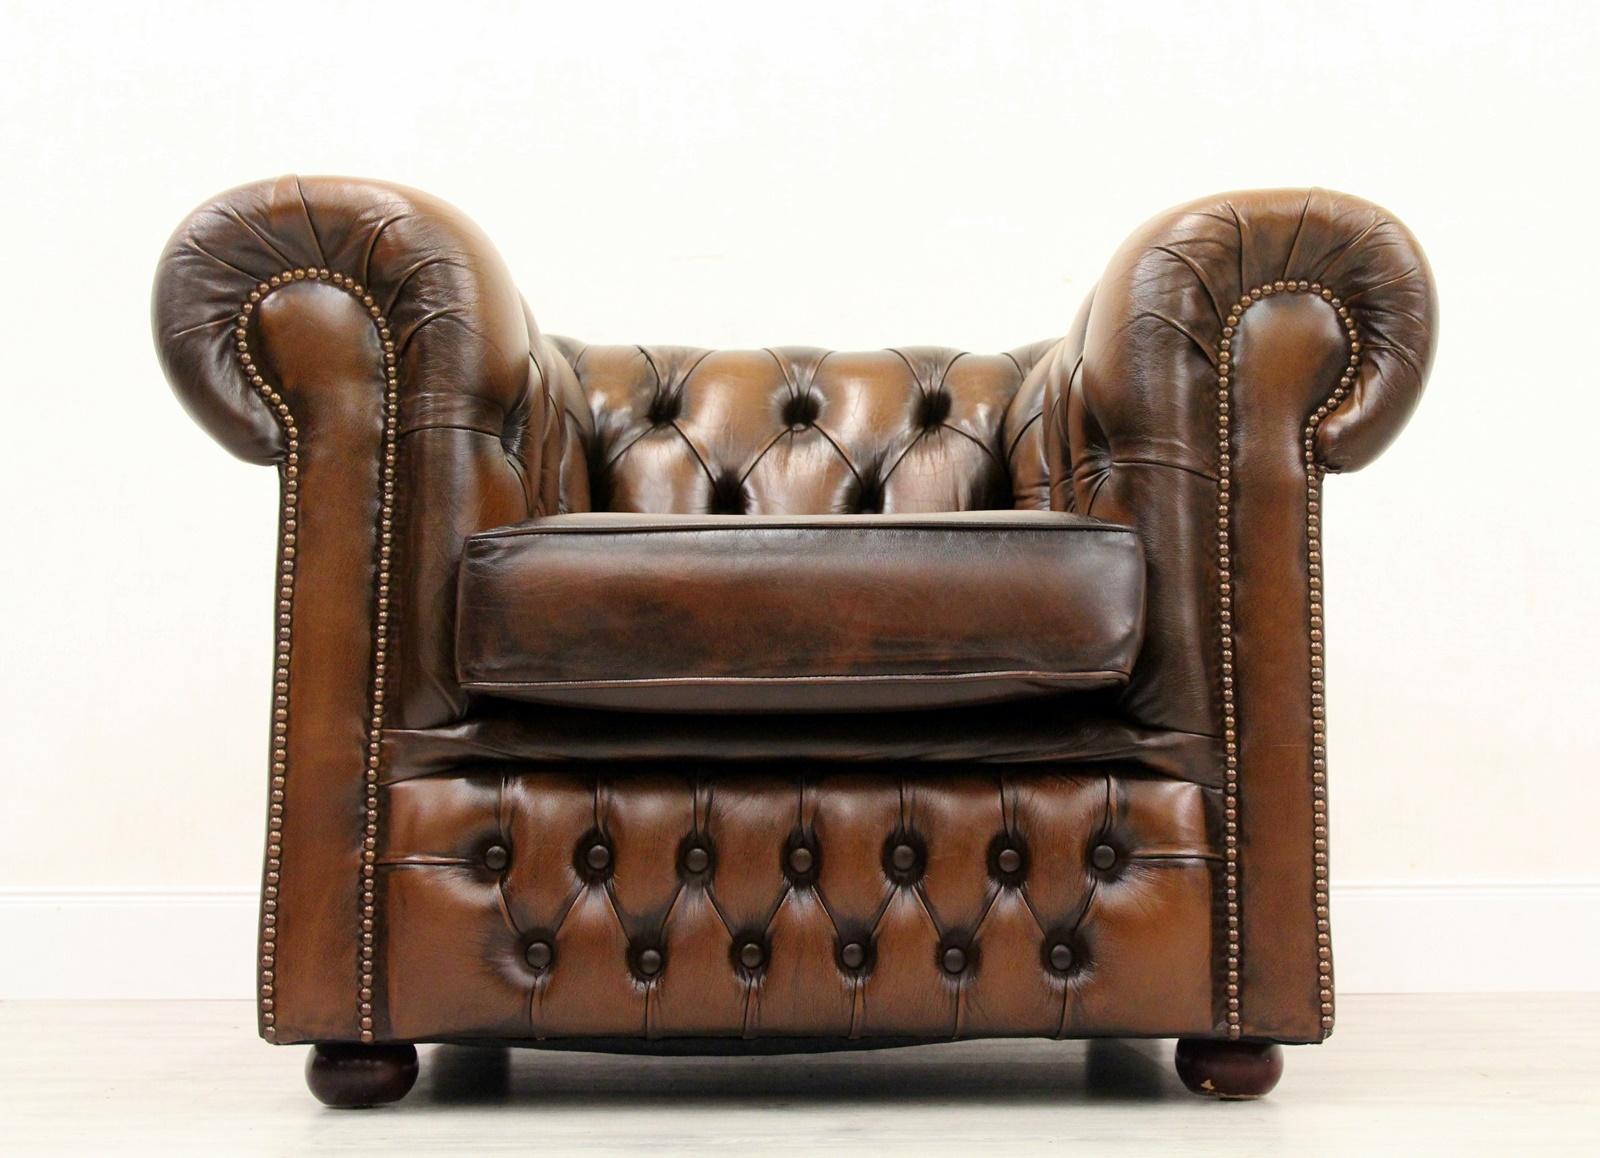 Chesterfield armchair
Measures: Height x 75cm, width x 100cm, depth x 90cm.
Condition: The chair is in a very good condition for the age and still has the charm of the 